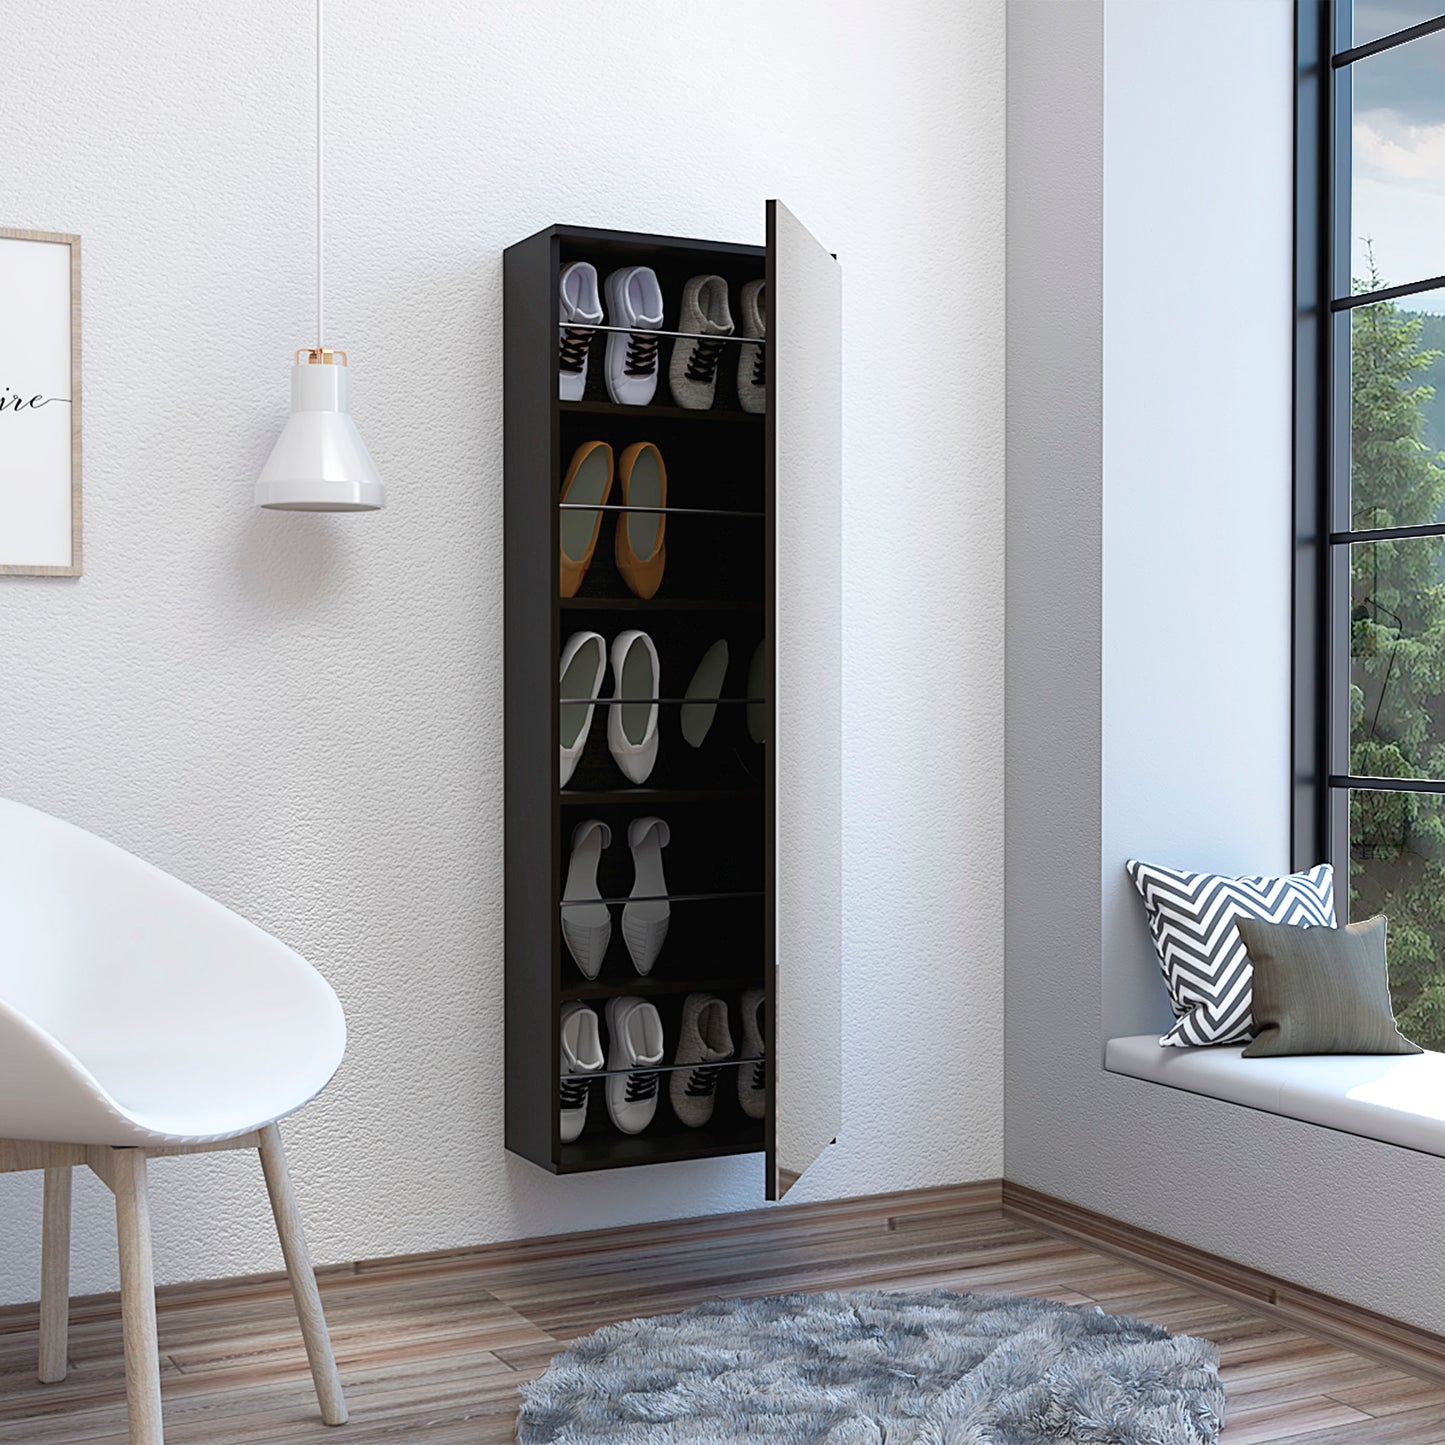 Leto Wall Mounted Shoe Rack With Mirror, Single Door, Capacity For Ten Shoes